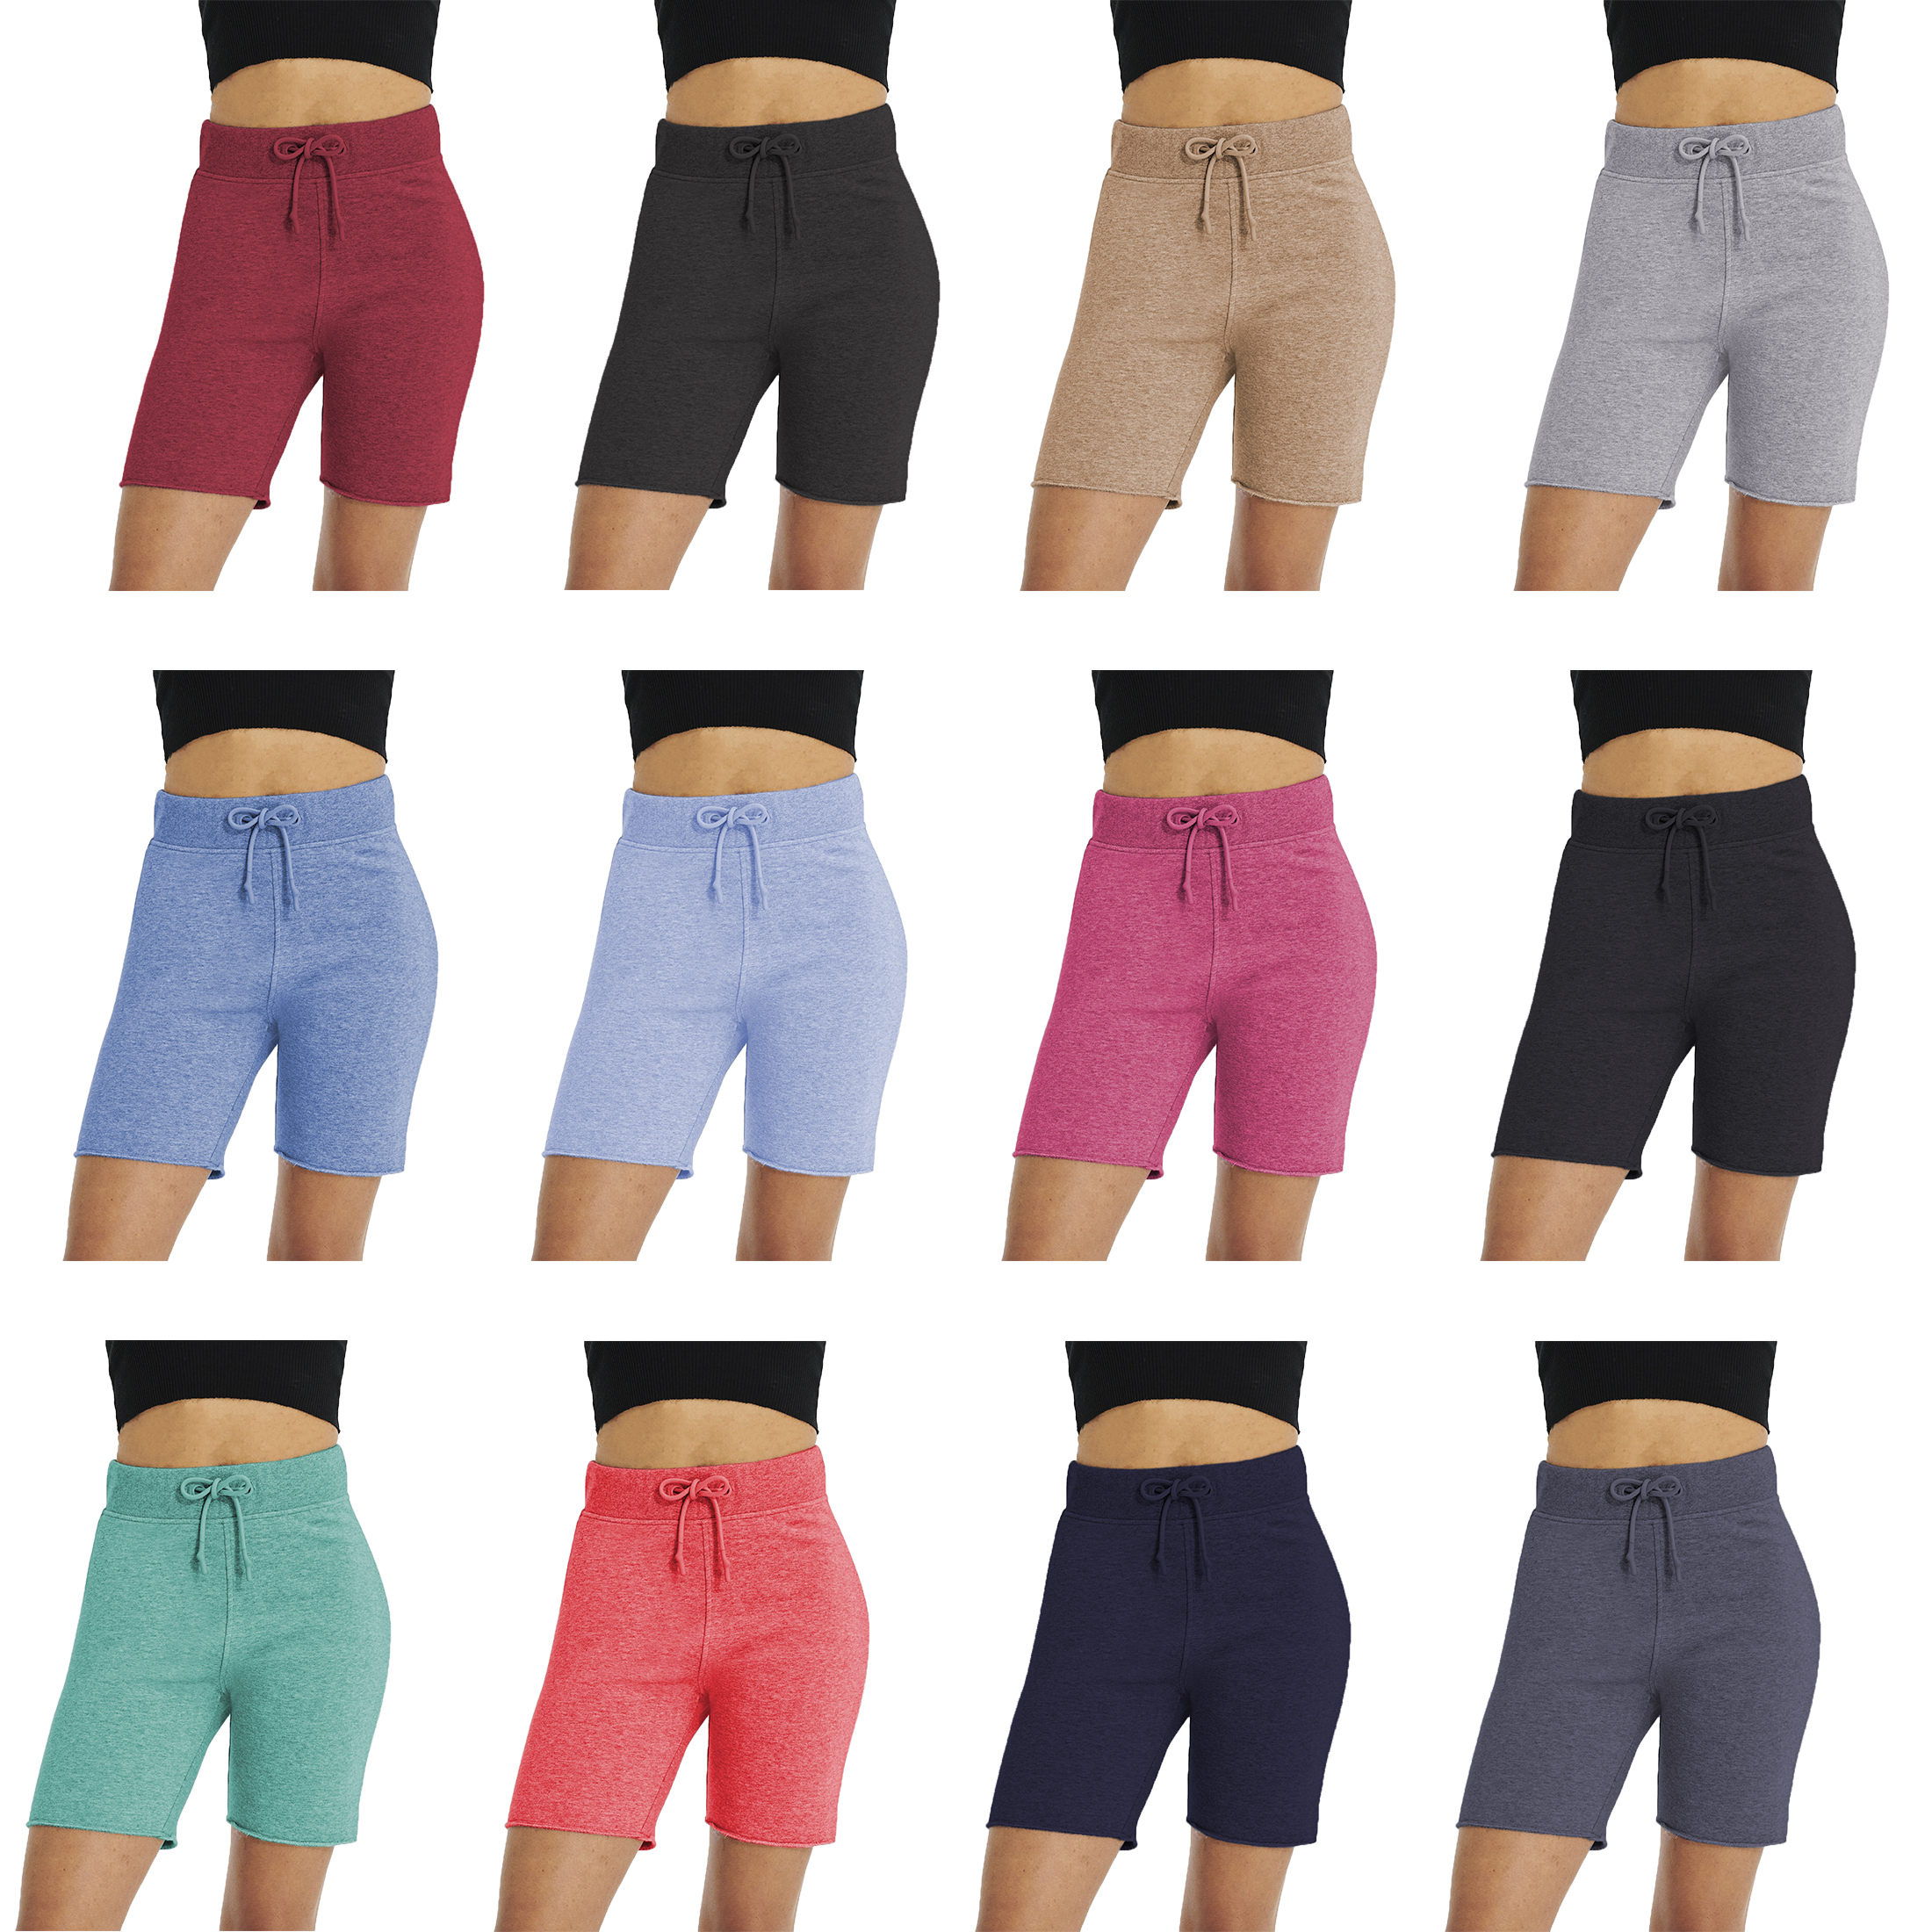 4-Pack Women’s Solid Summer Bermuda Shorts Soft Slim-Fit Stretchy Active Athletic Skinny Ladies Pants - L